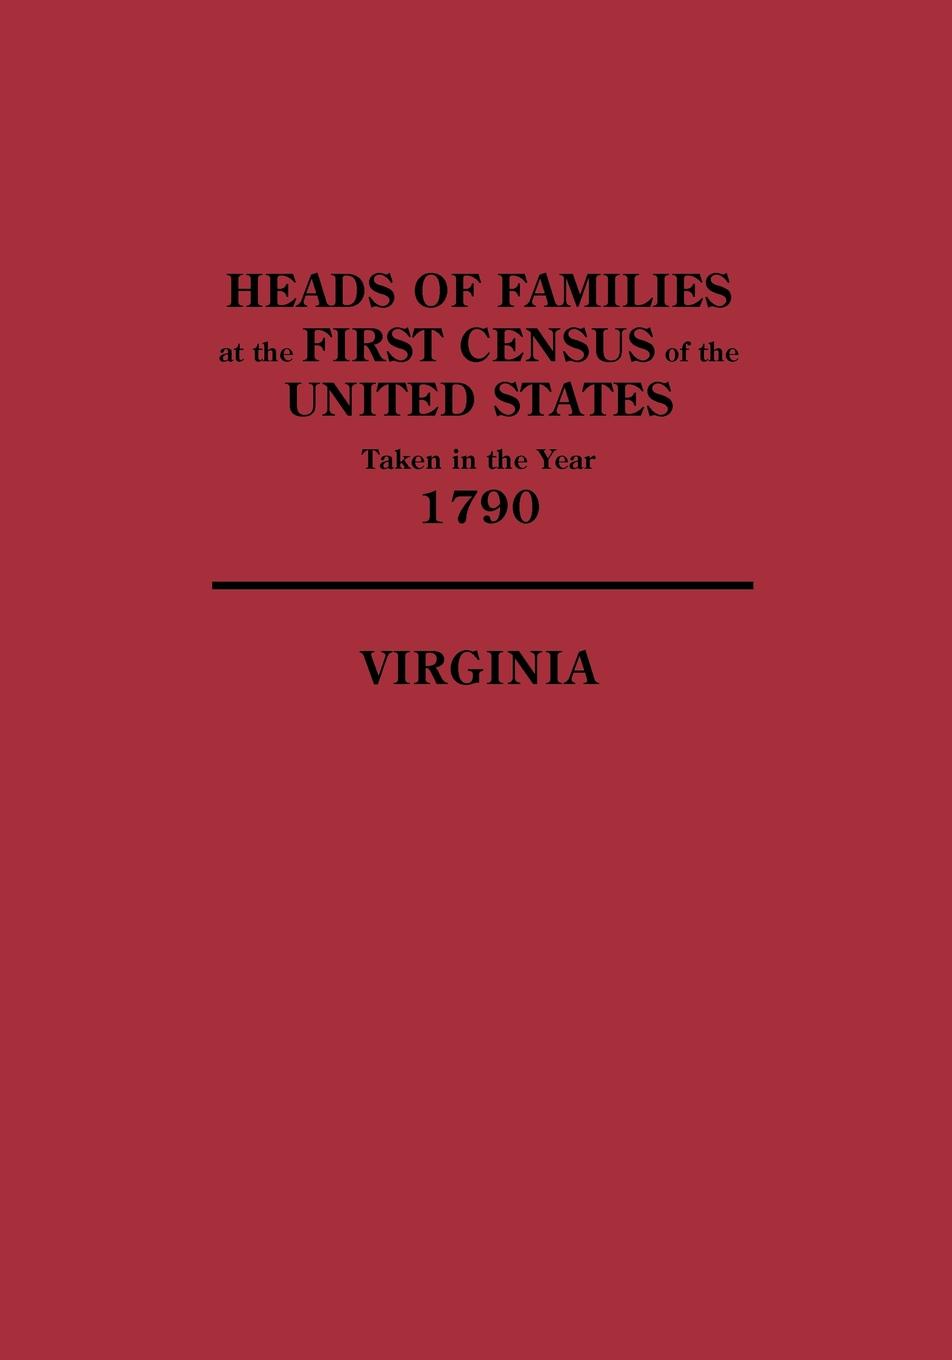 Heads of Families at the First Census of the United States, Taken in the Year 1790. Virginia